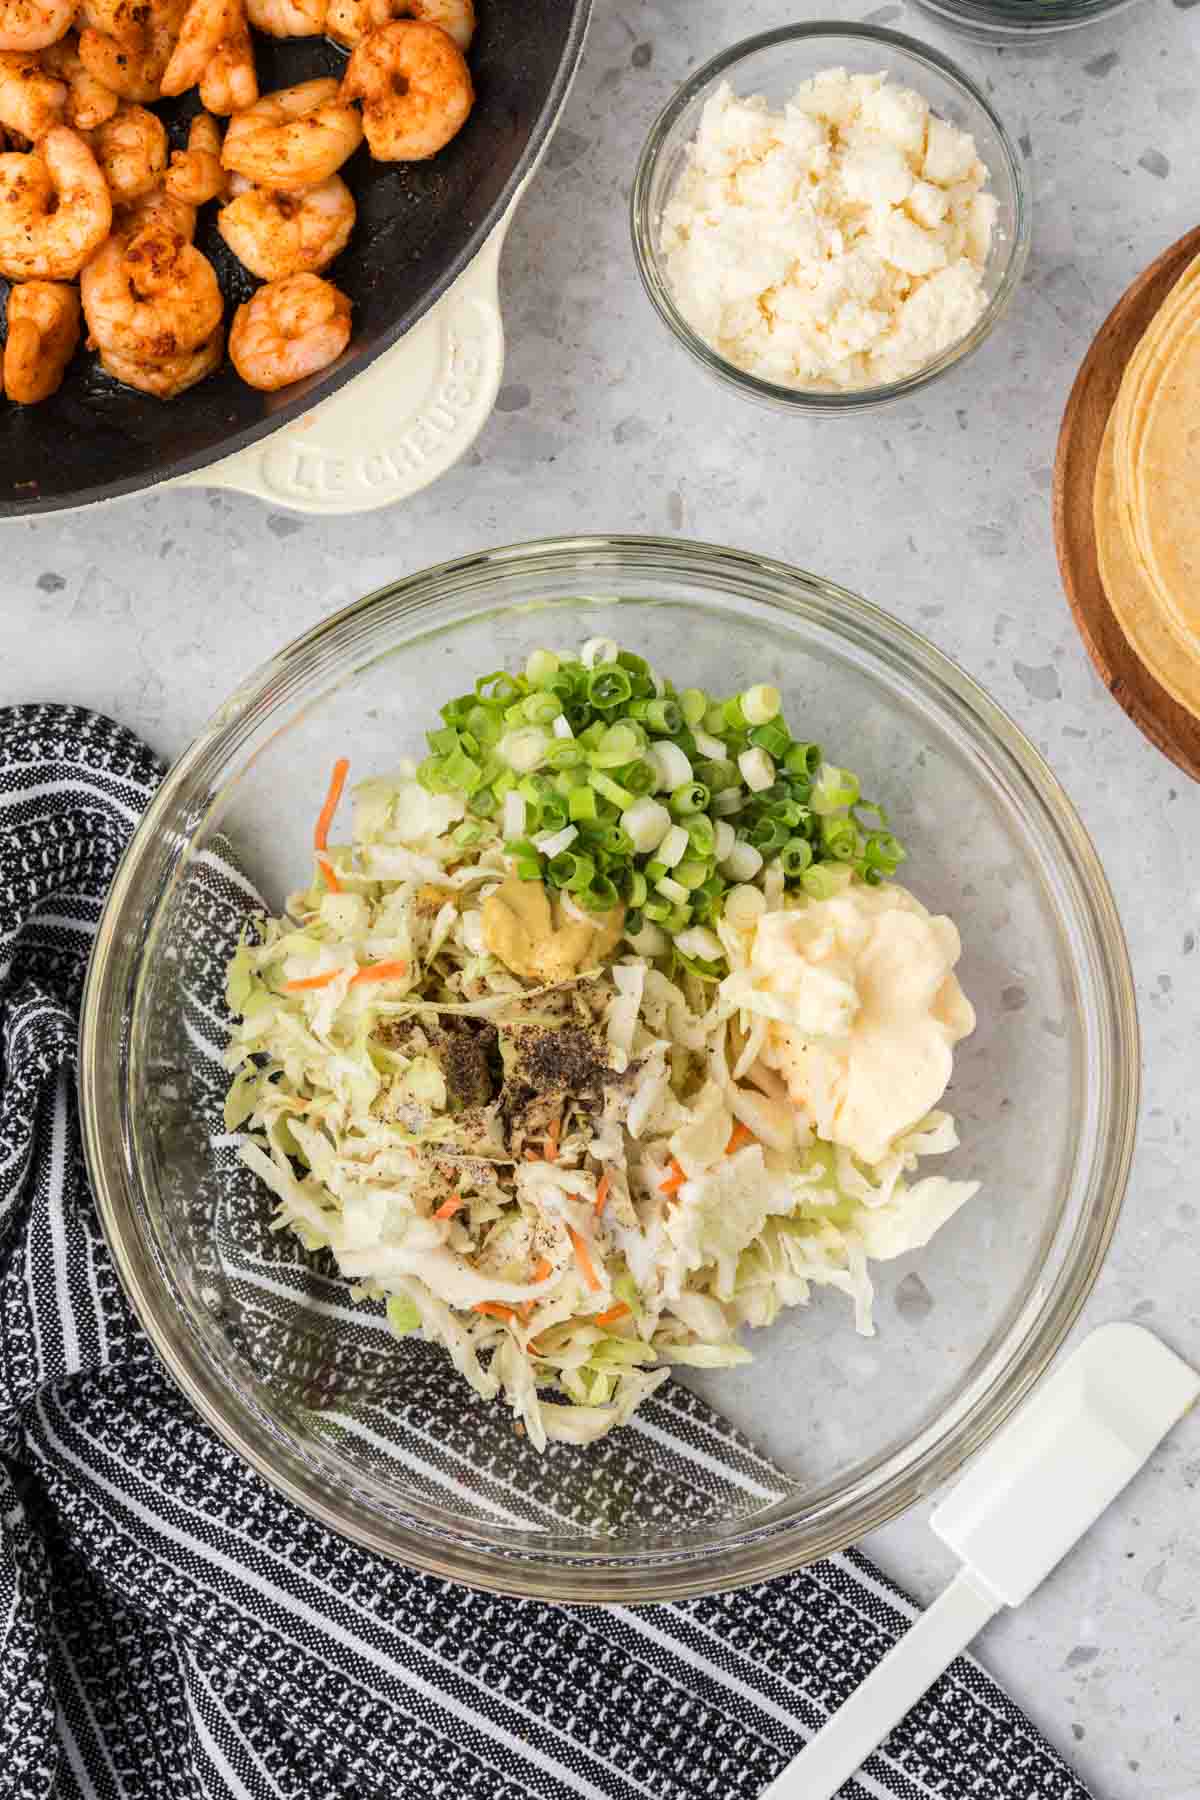 Combining the slaw ingredients in a bowl 